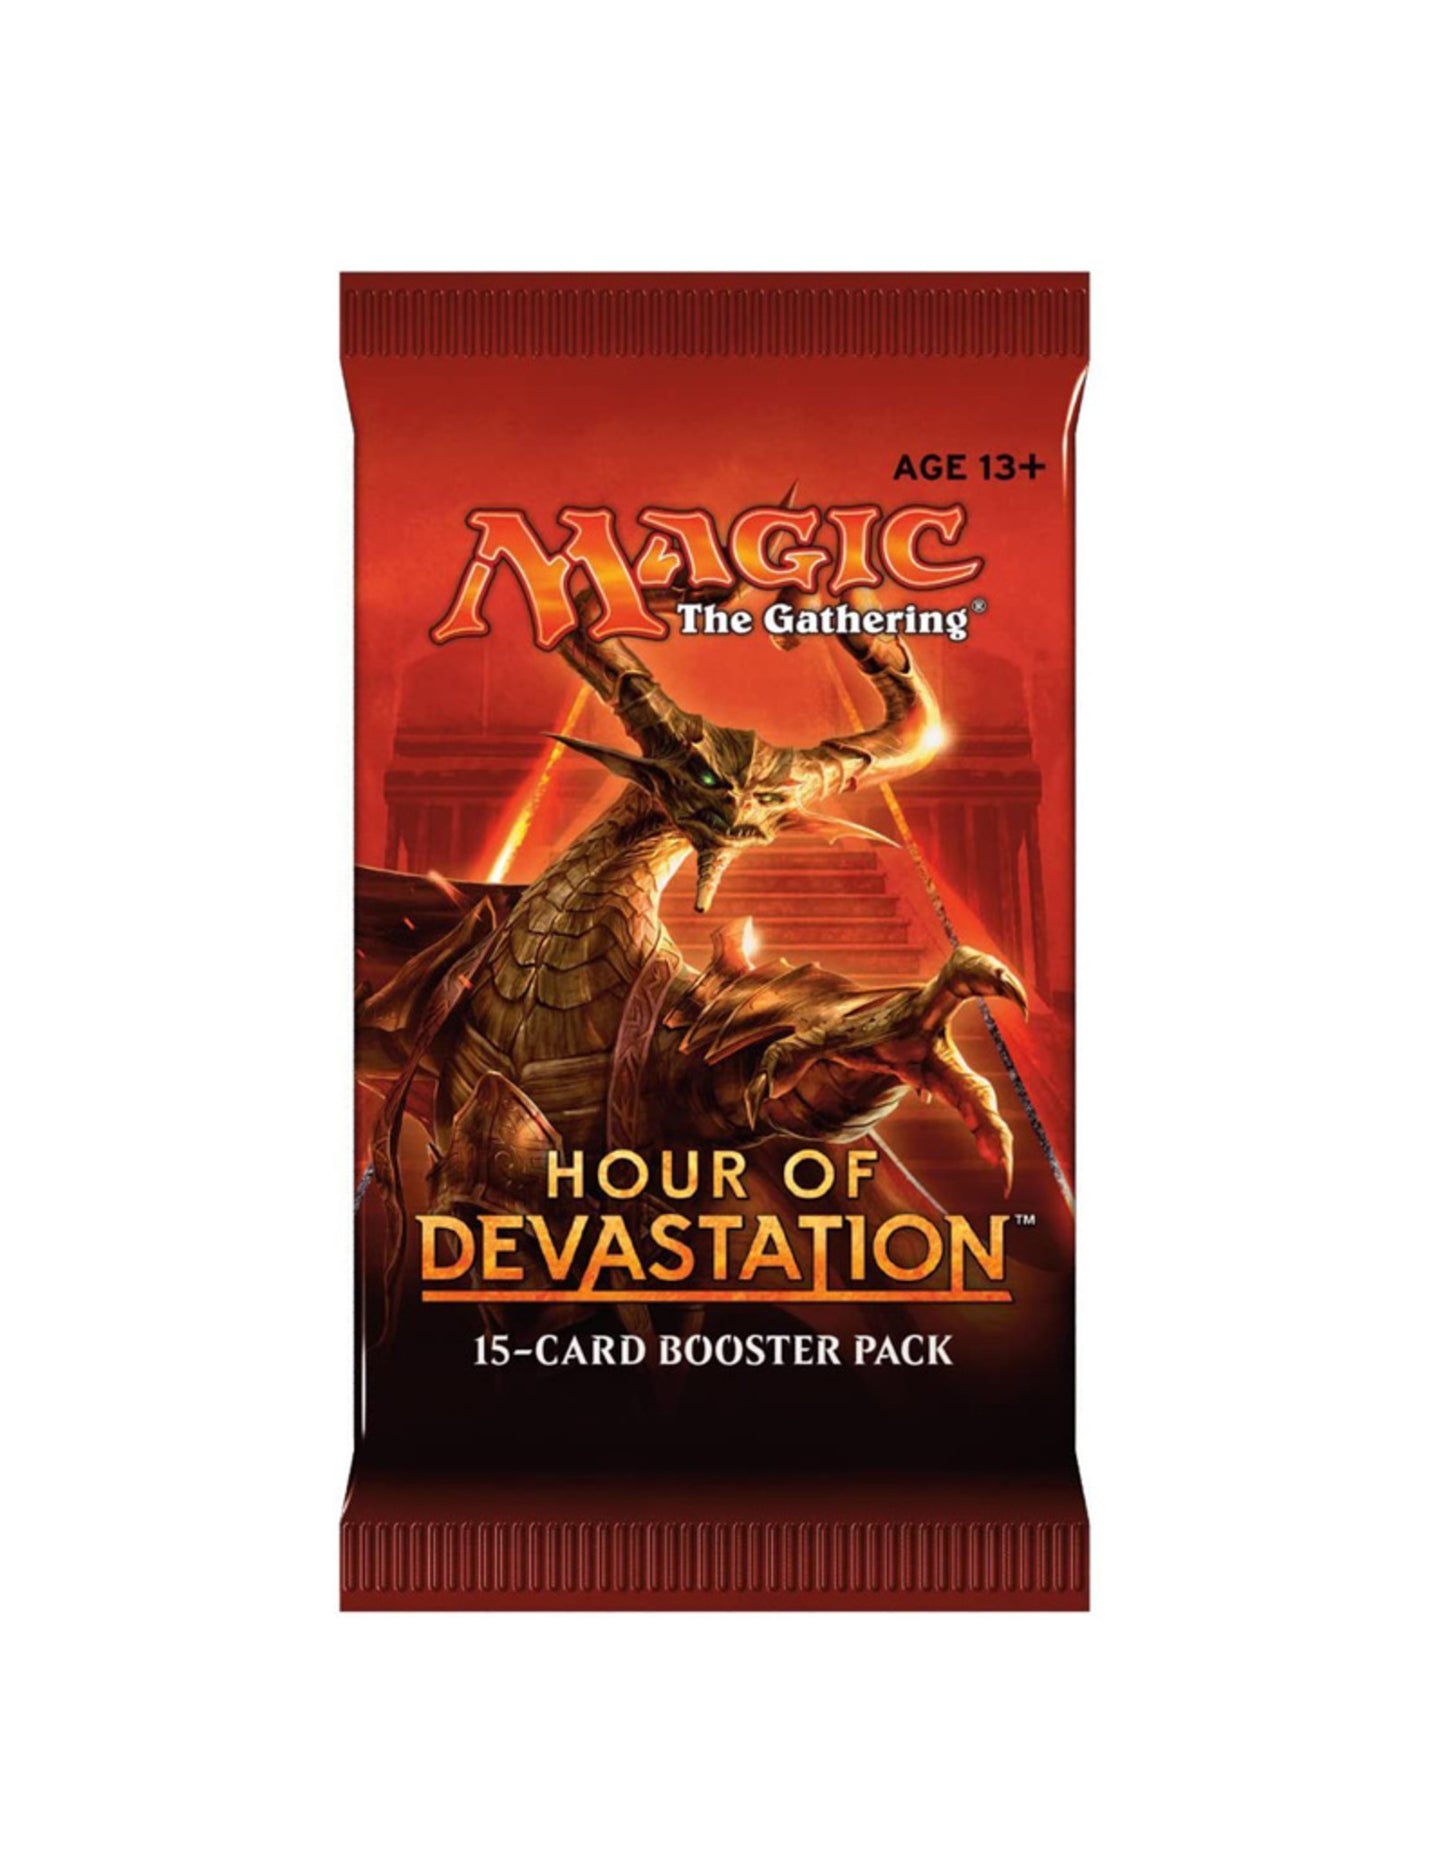 Magic the Gathering: Hour of Devastation Booster Pack